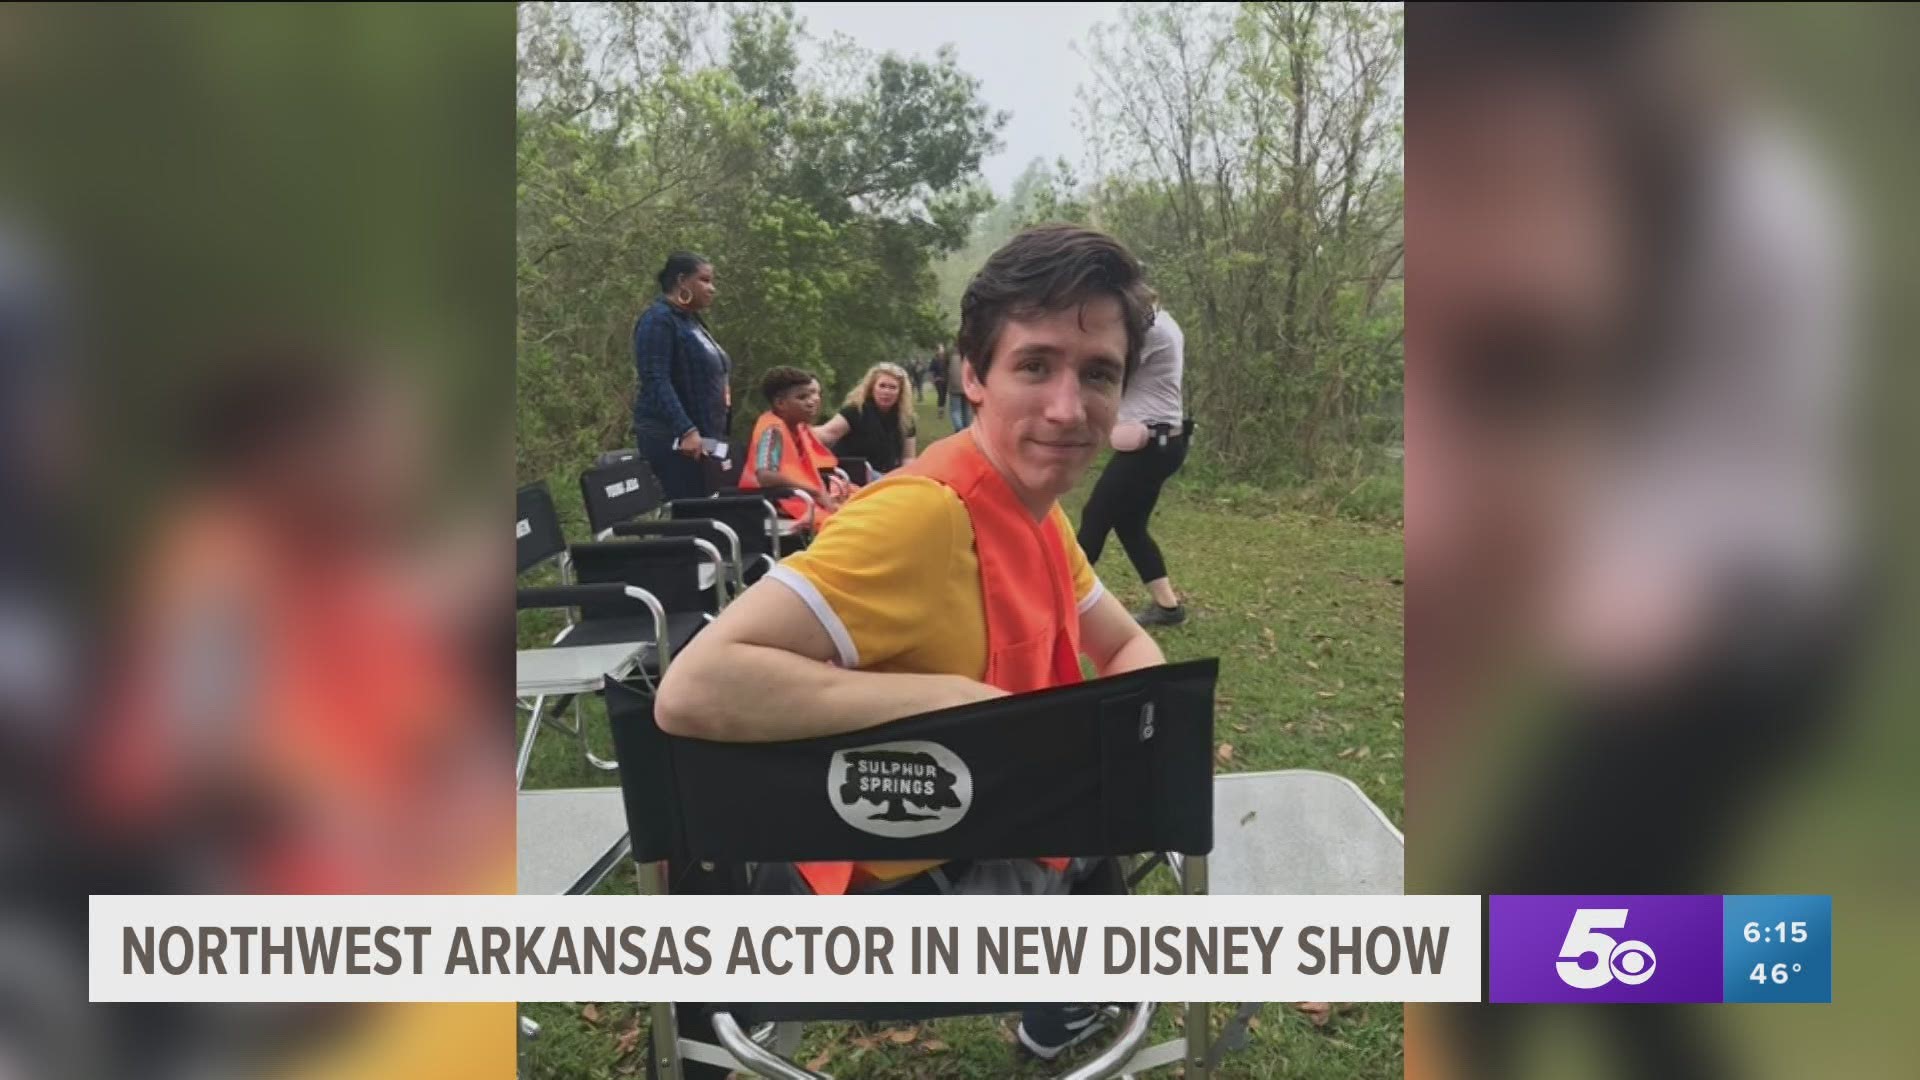 Adam Henslee will be appearing on the Disney channel’s show "Secrets of Sulphur Springs."